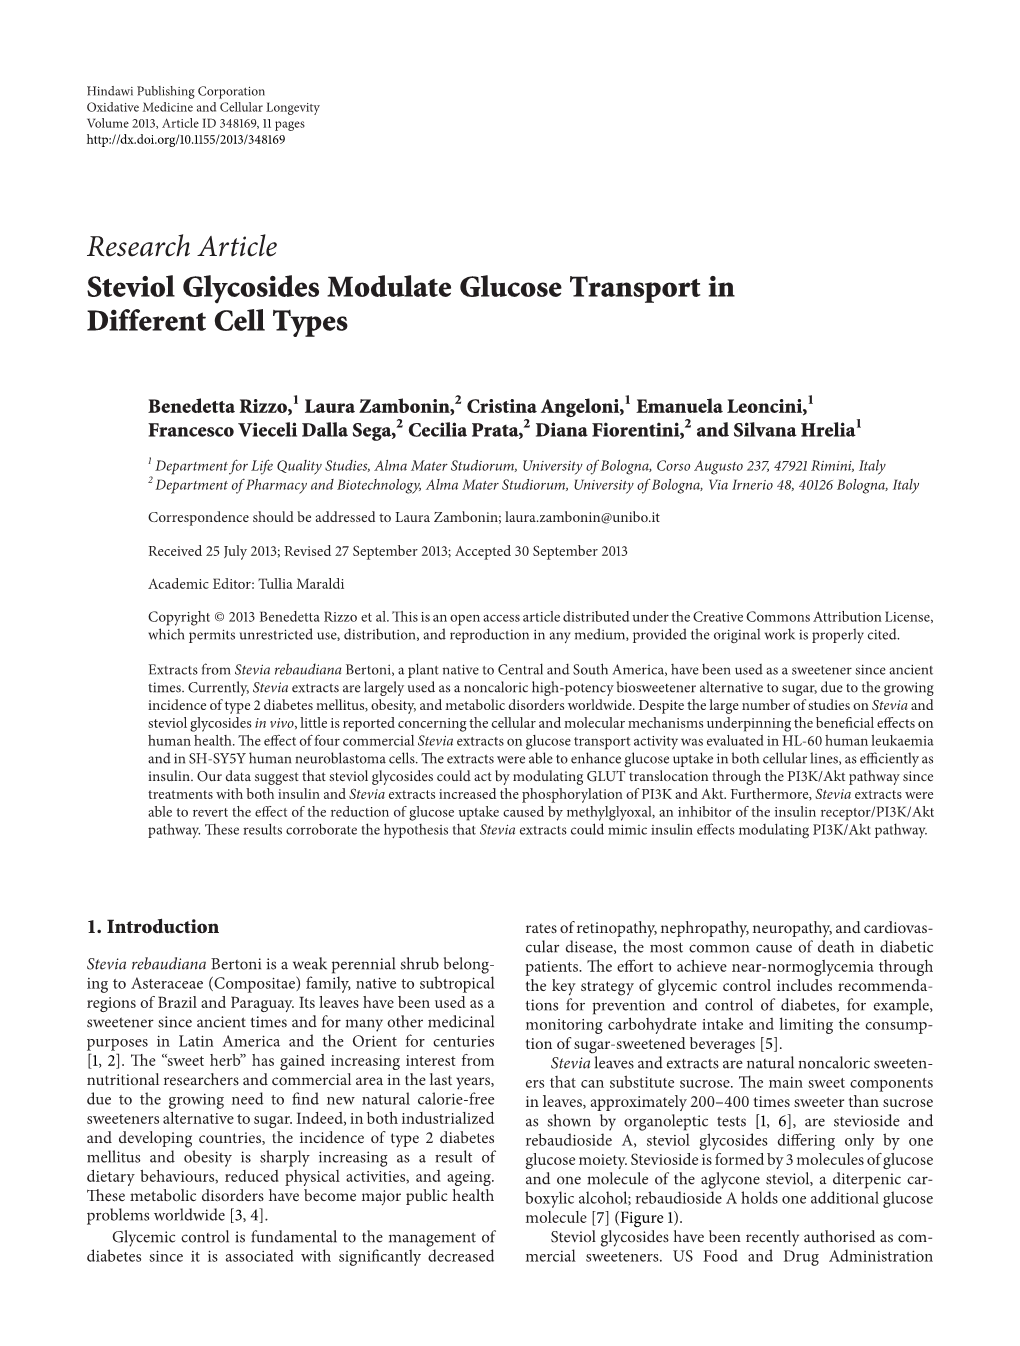 Steviol Glycosides Modulate Glucose Transport in Different Cell Types